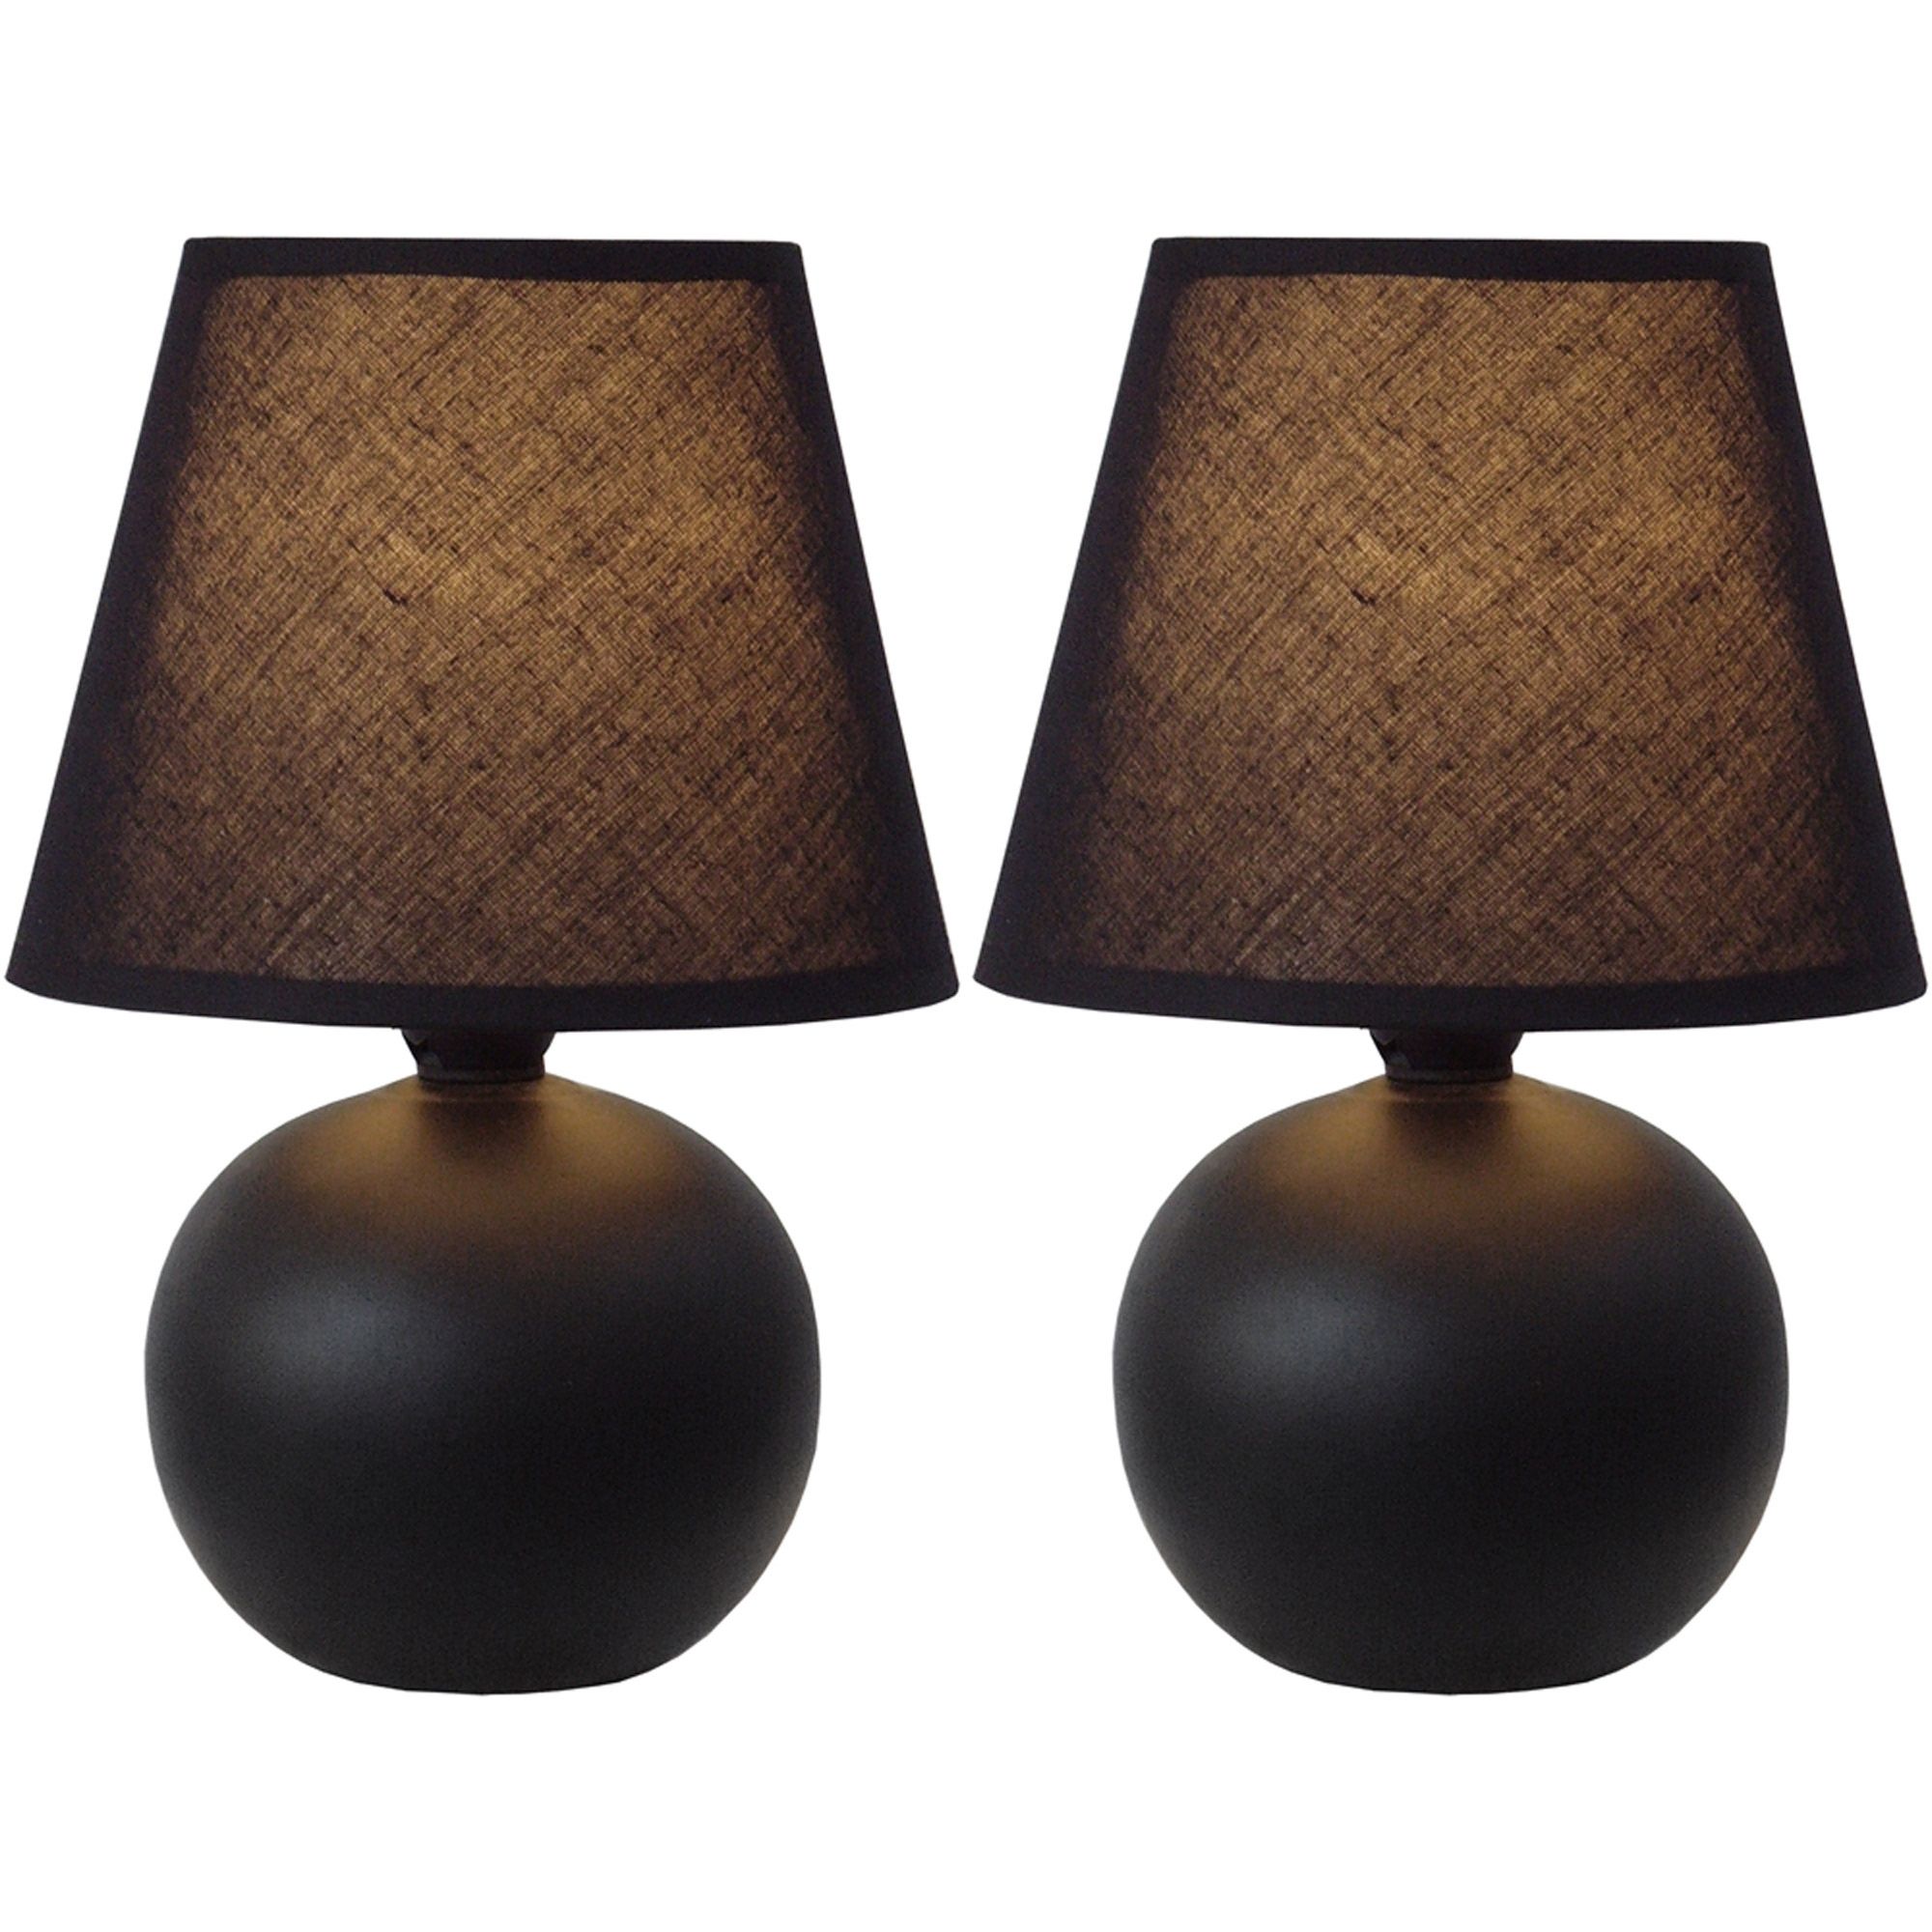 Living Room Table Lamps Sets Pertaining To Most Current Table Lamp In Dark Bronze – Set Of 2 – Walmart (View 1 of 15)